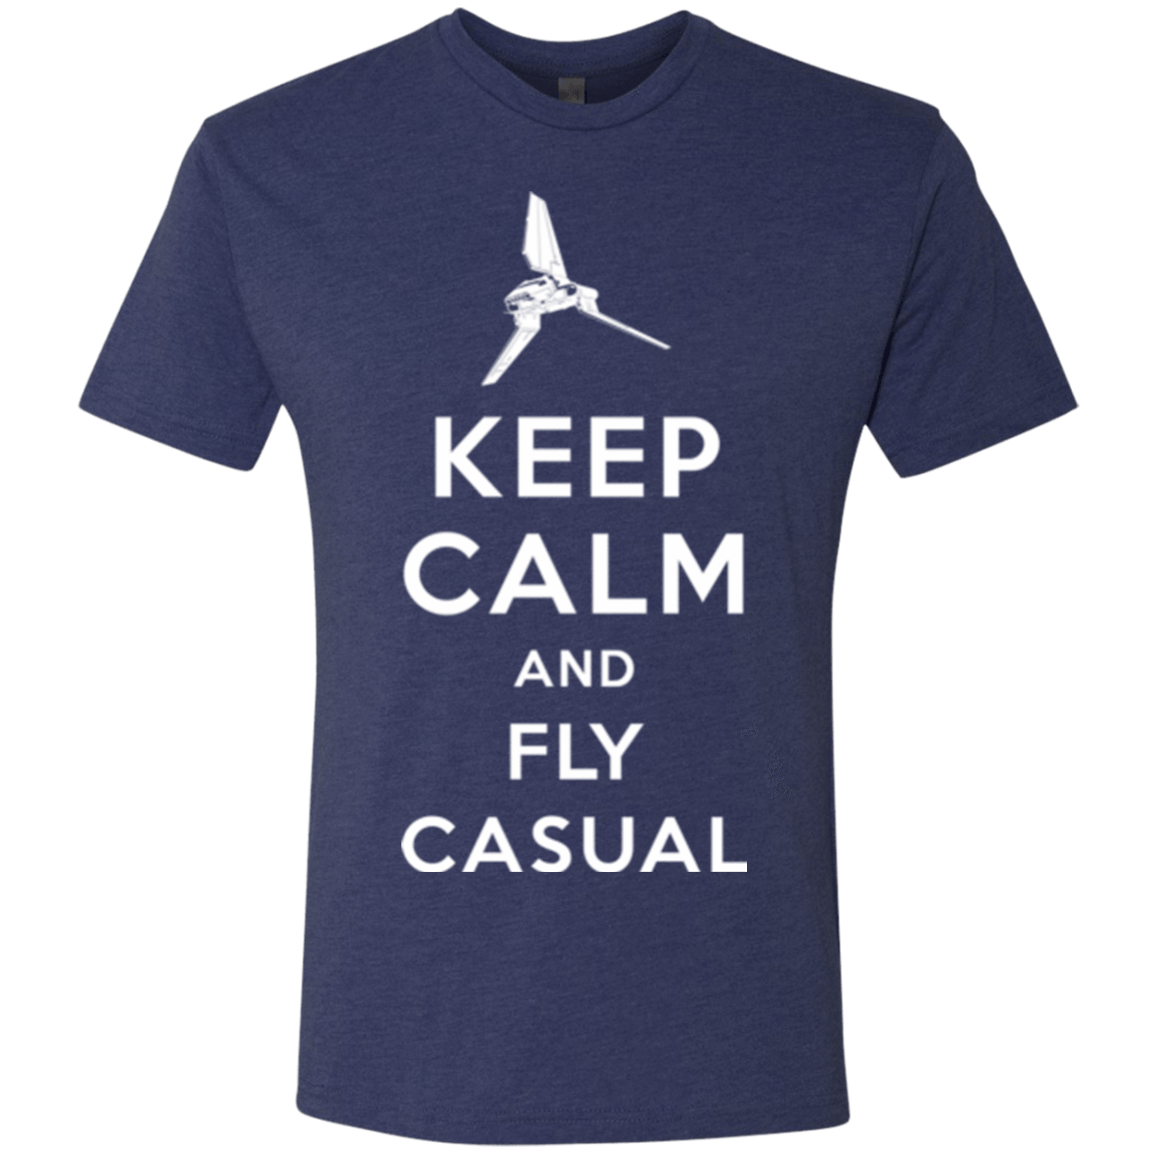 T-Shirts Vintage Navy / Small Keep Calm and Fly Casual Men's Triblend T-Shirt